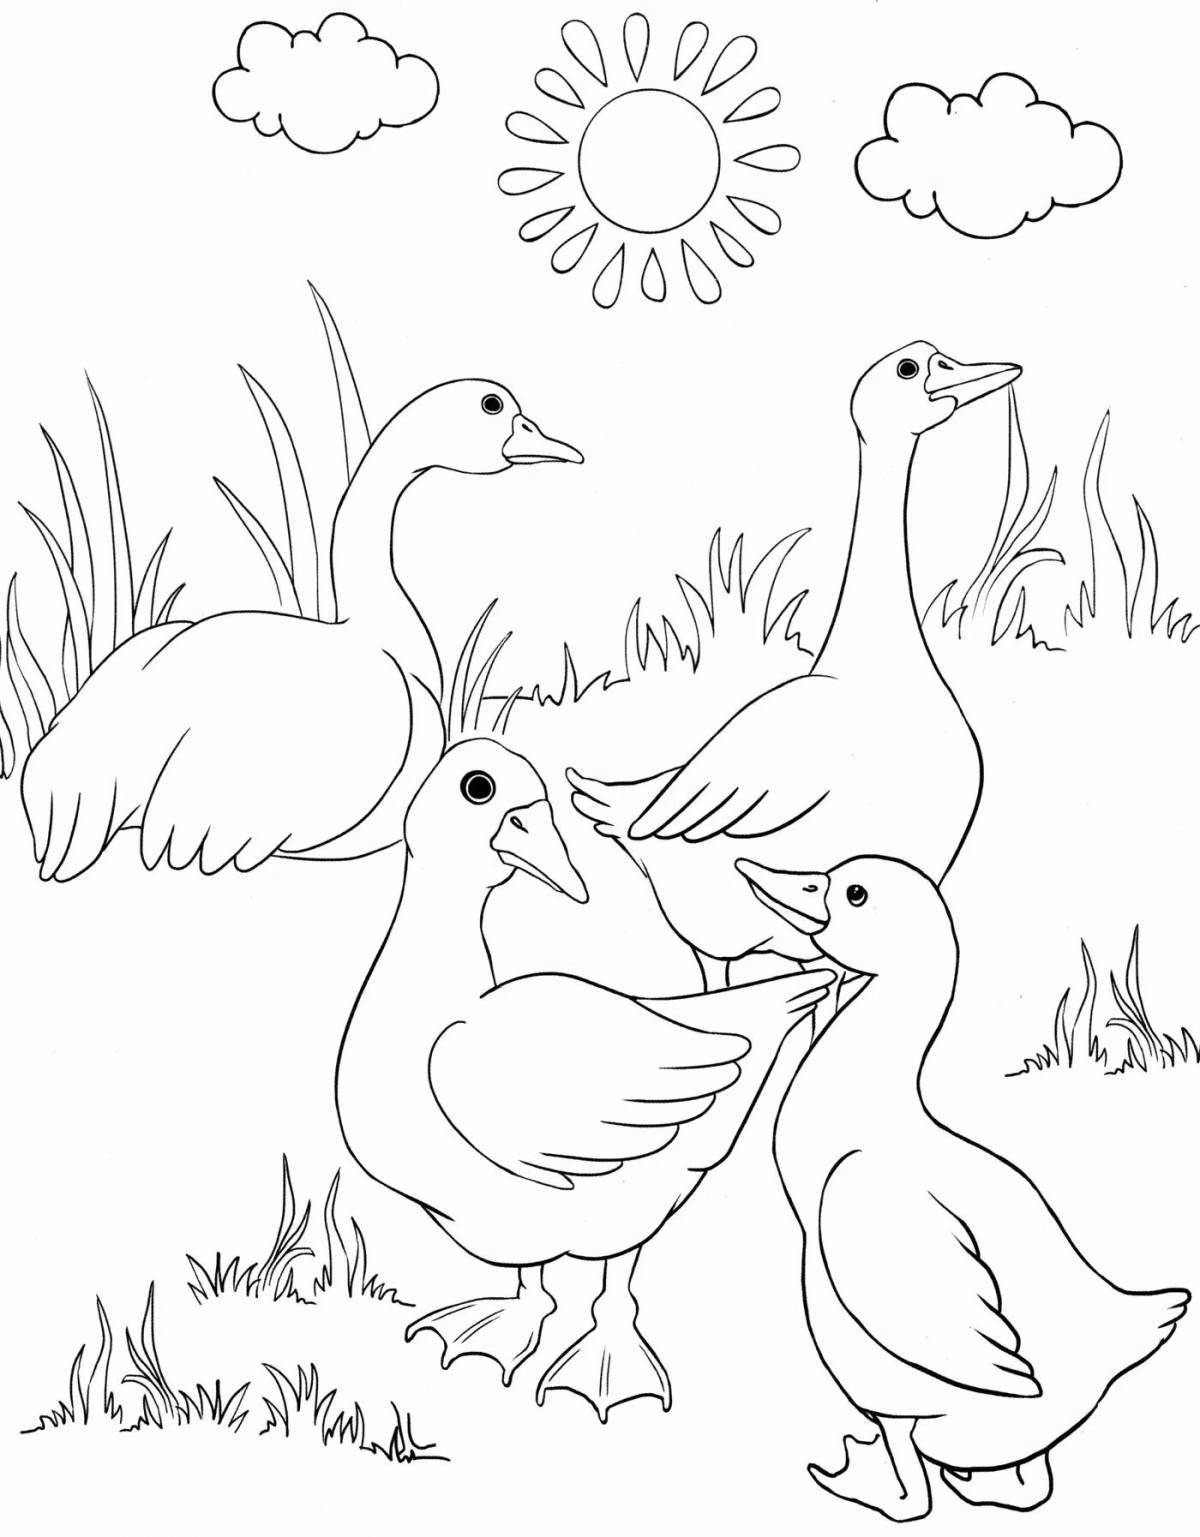 Cute geese coloring pages for girls